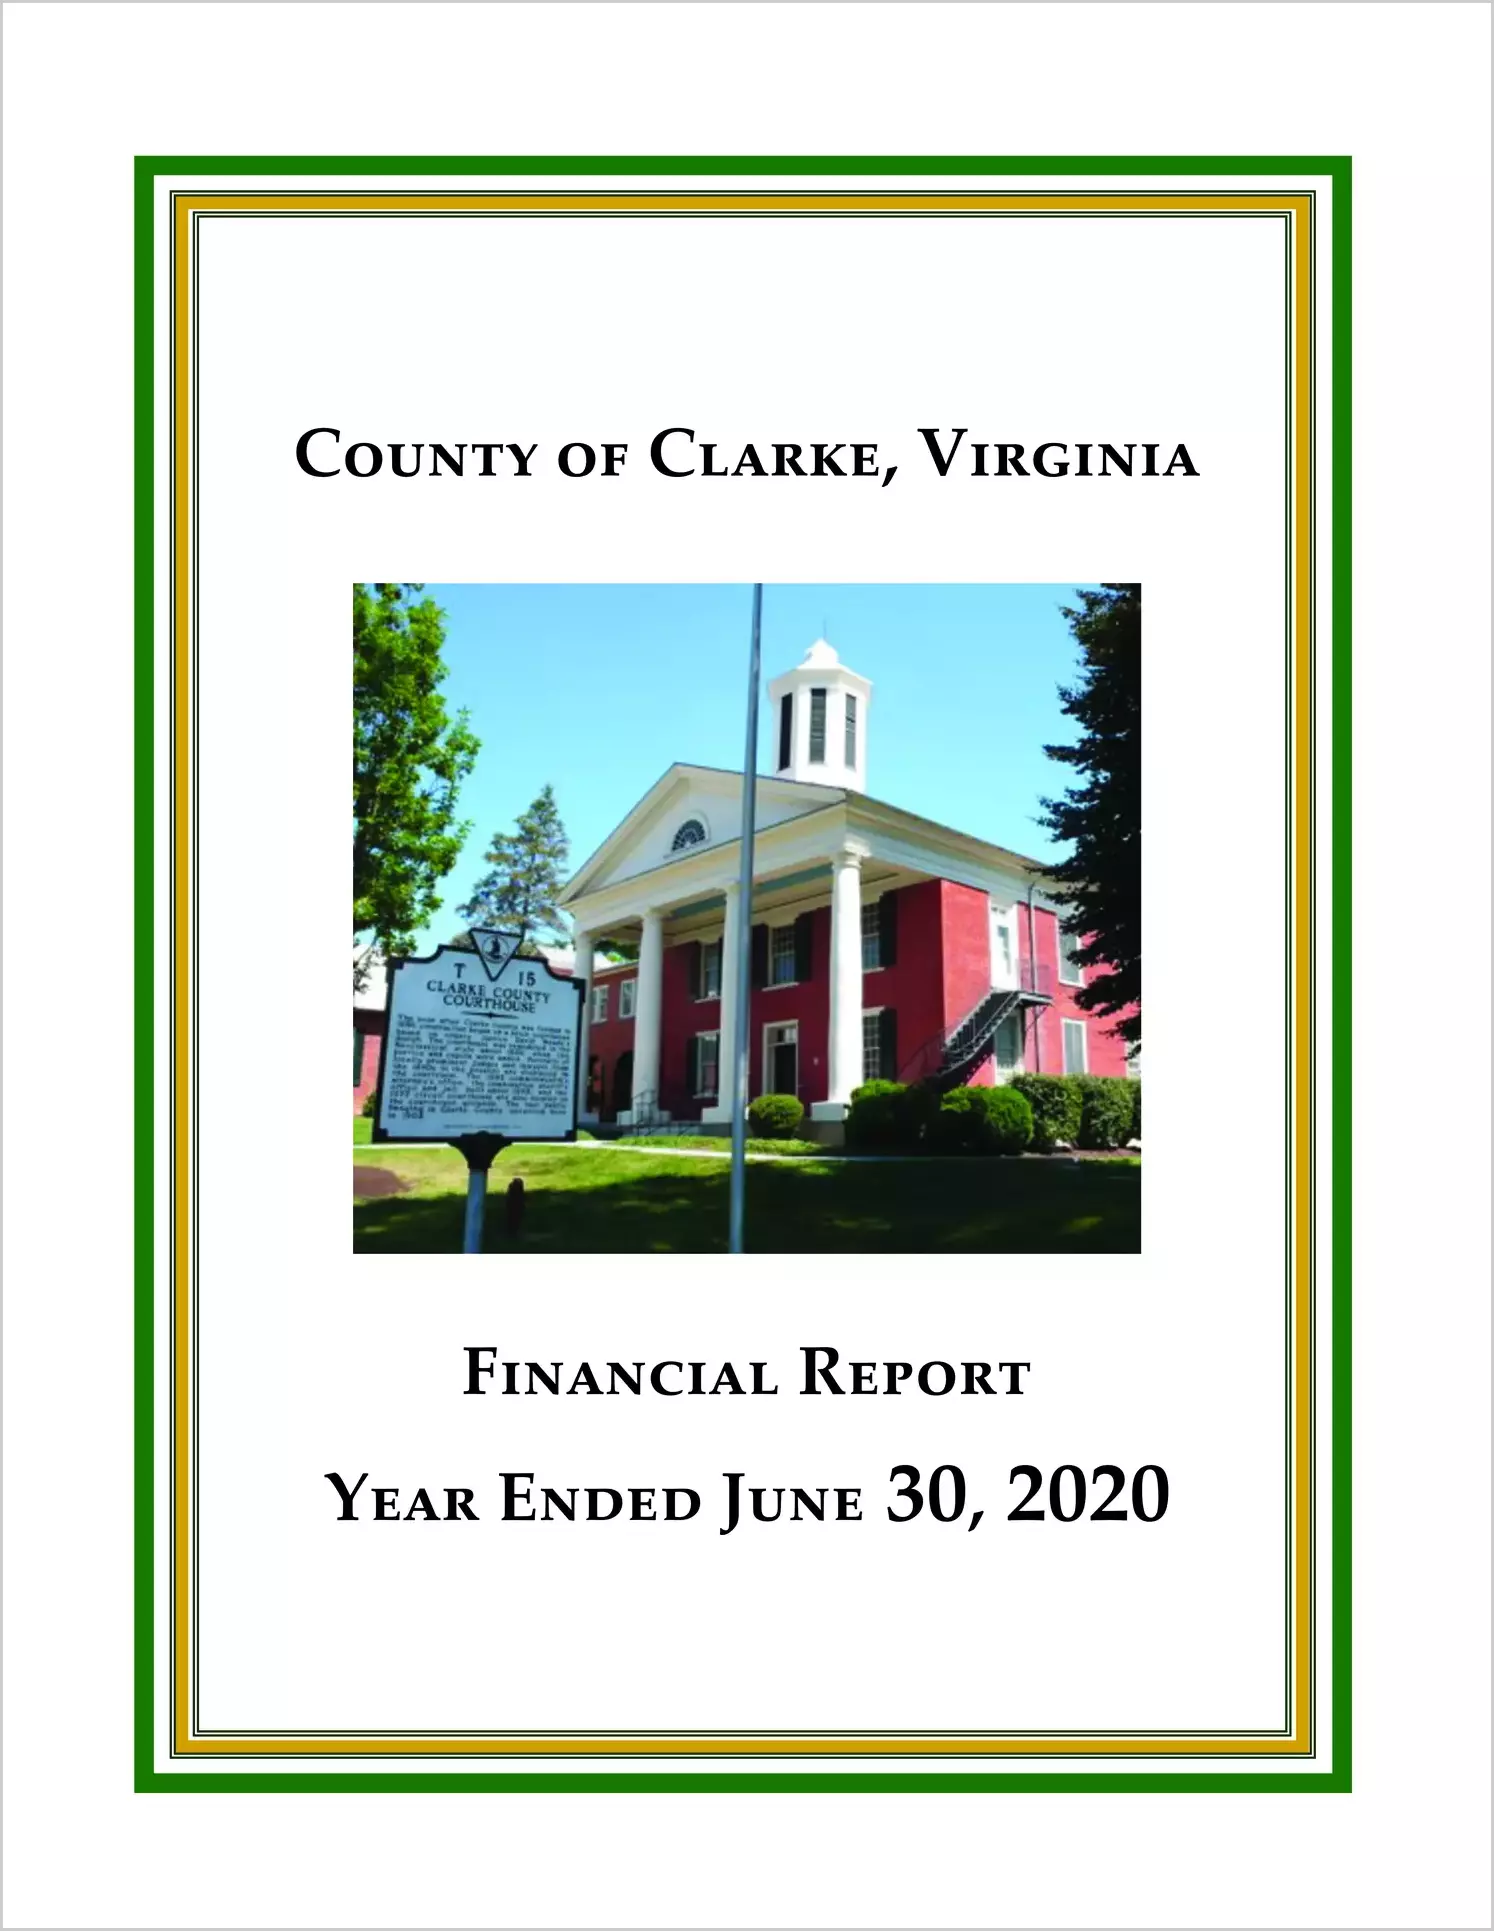 2020 Annual Financial Report for County of Clarke